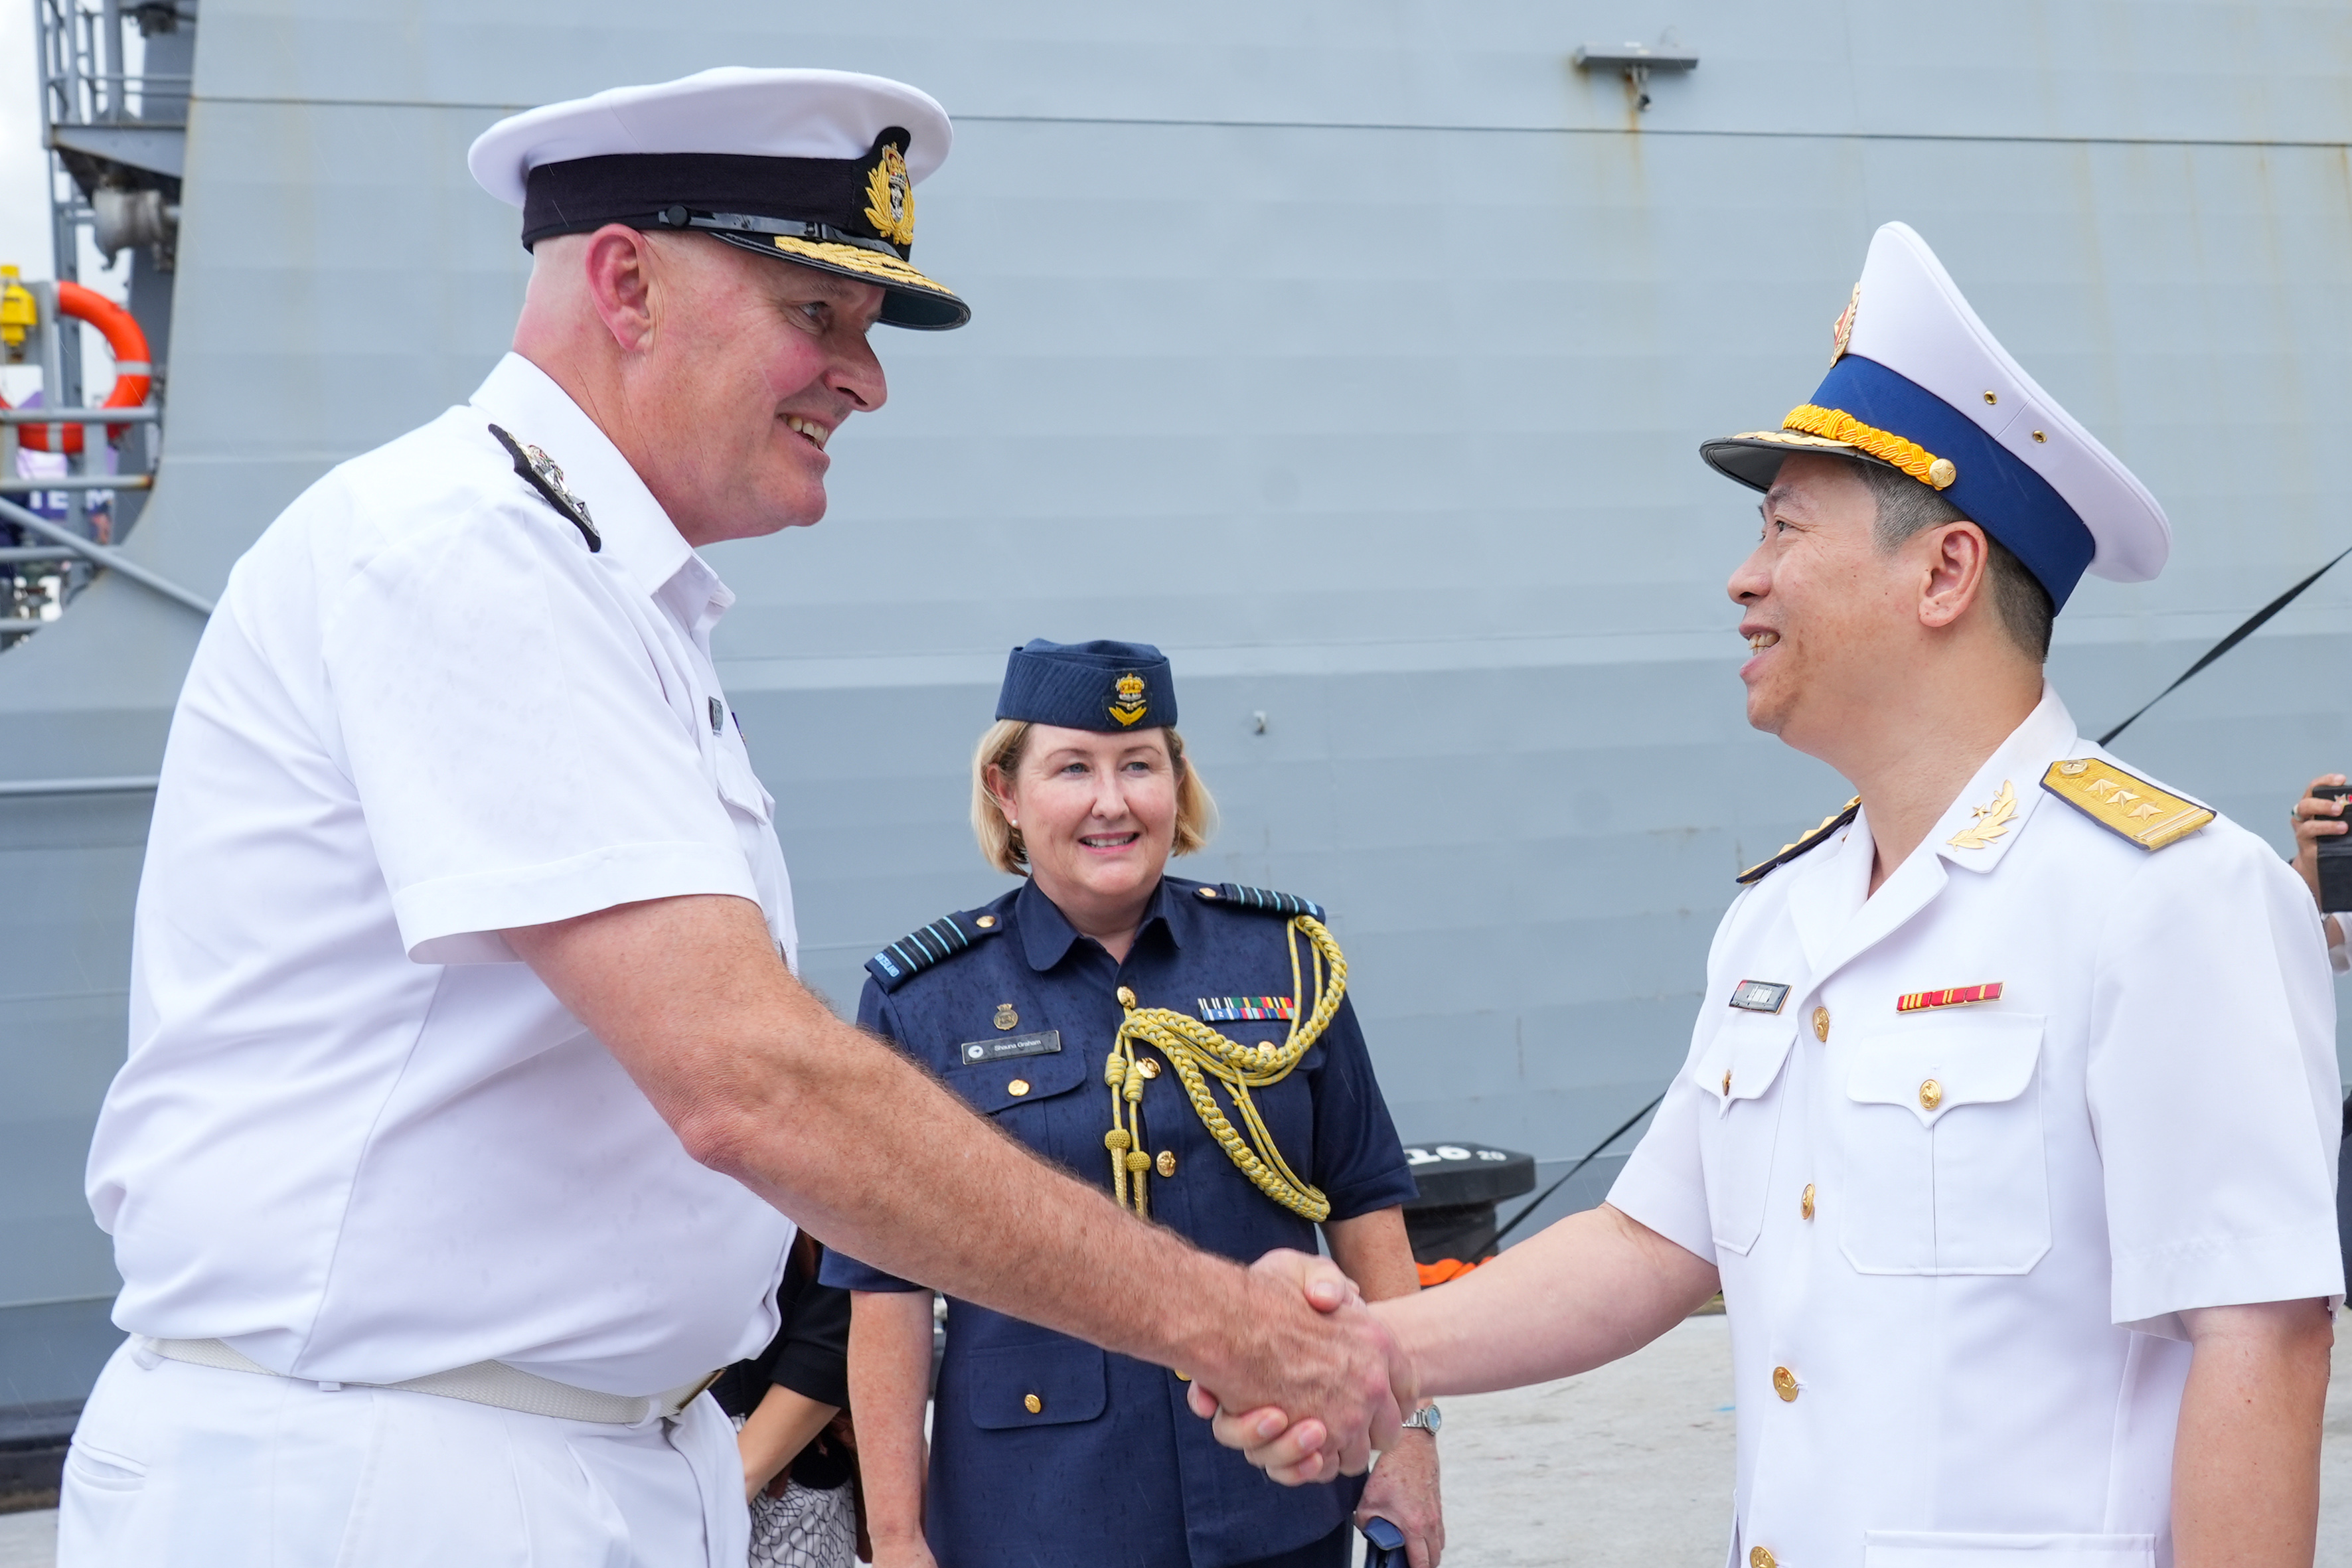 New Zealand Joint Forces Commander, Rear Admiral James Gilmore (L), said the crews of the two ships were very eager to learn about the culture and people of Vietnam. Photo: Huu Hanh / Tuoi Tre